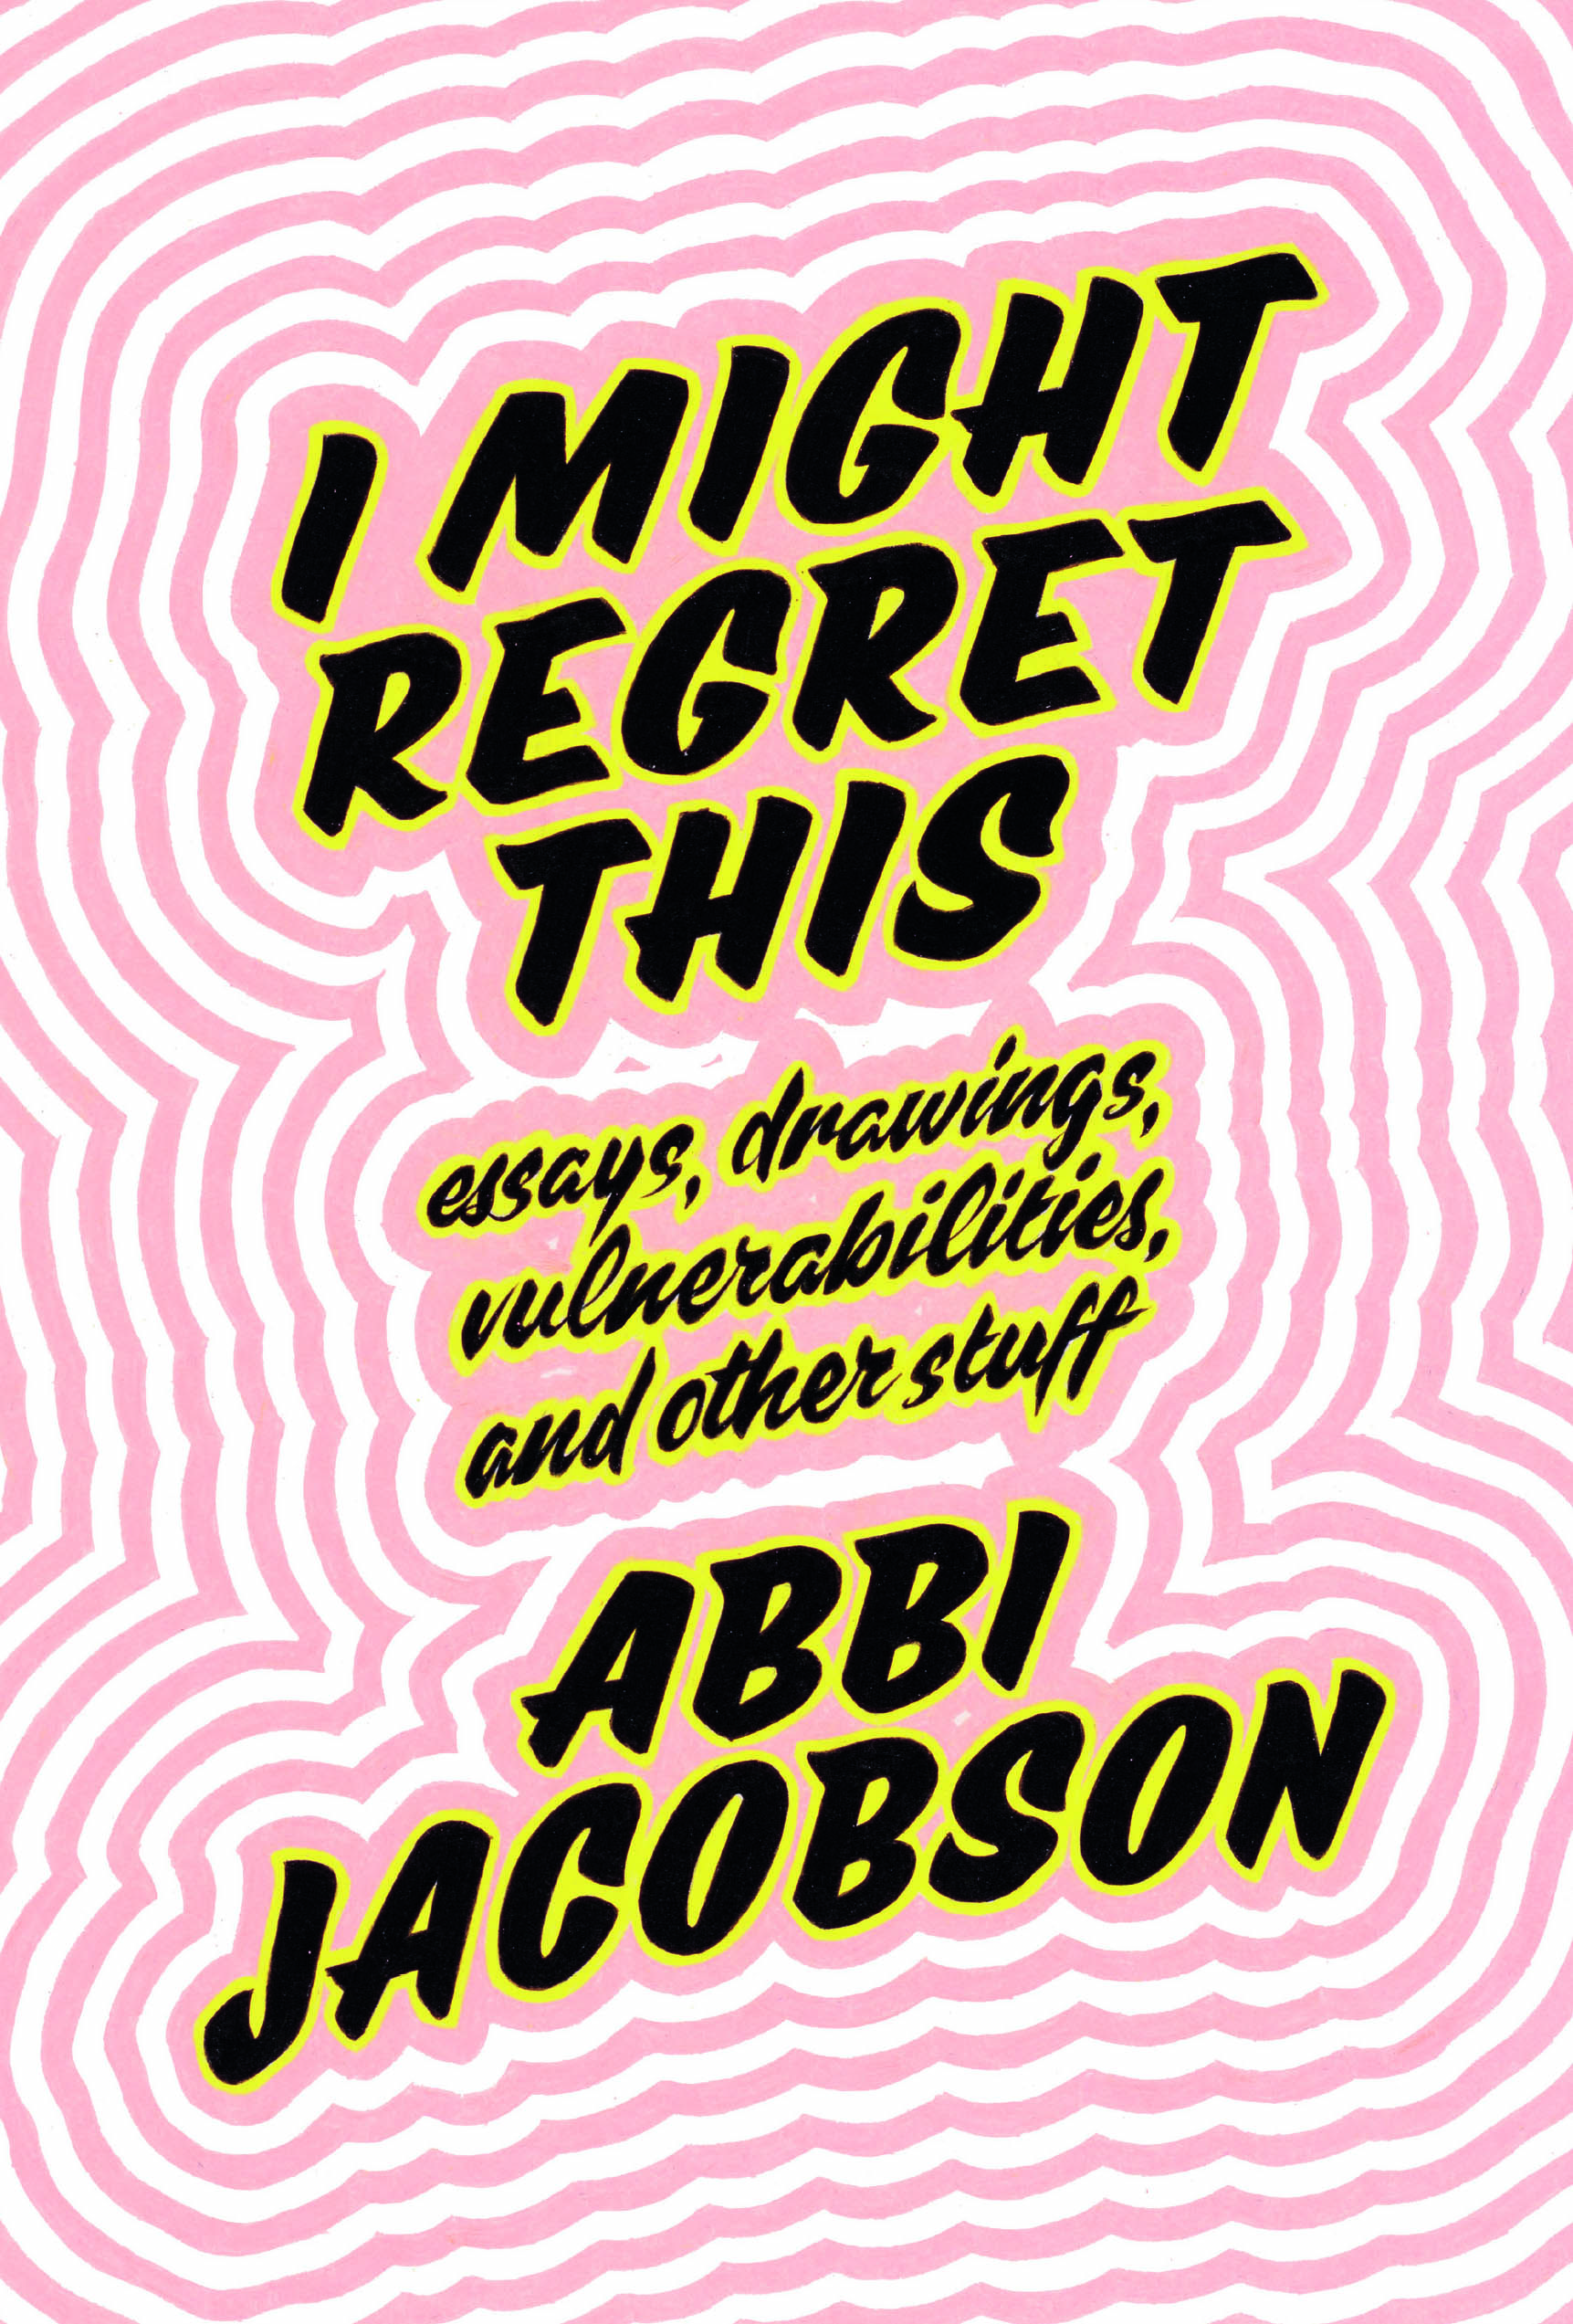 abbi jacobson i might regret this